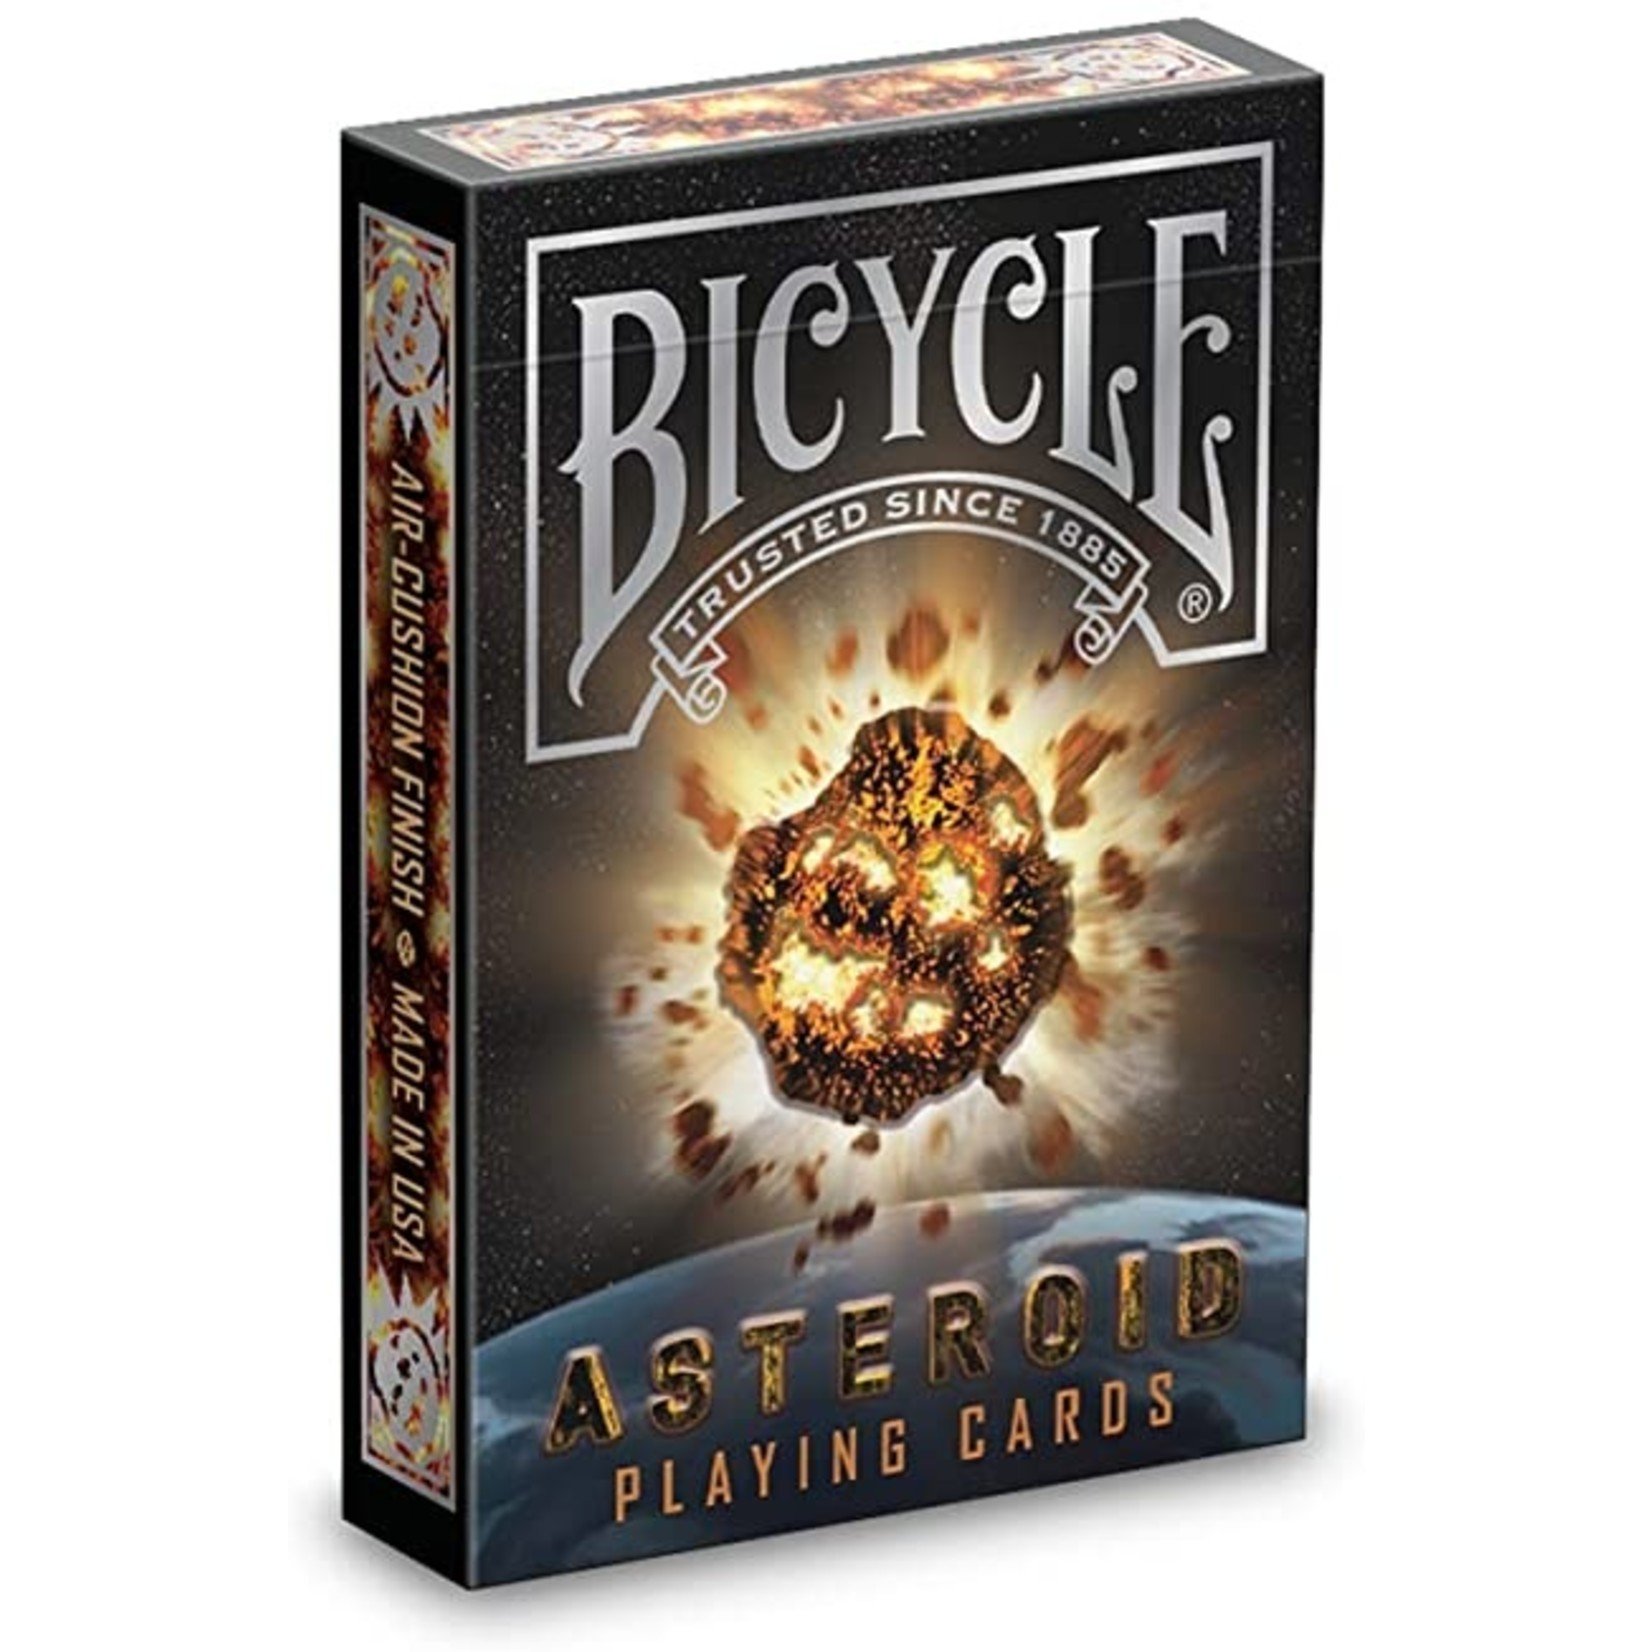 Bicycle Bicycle Playing Cards Asteroids